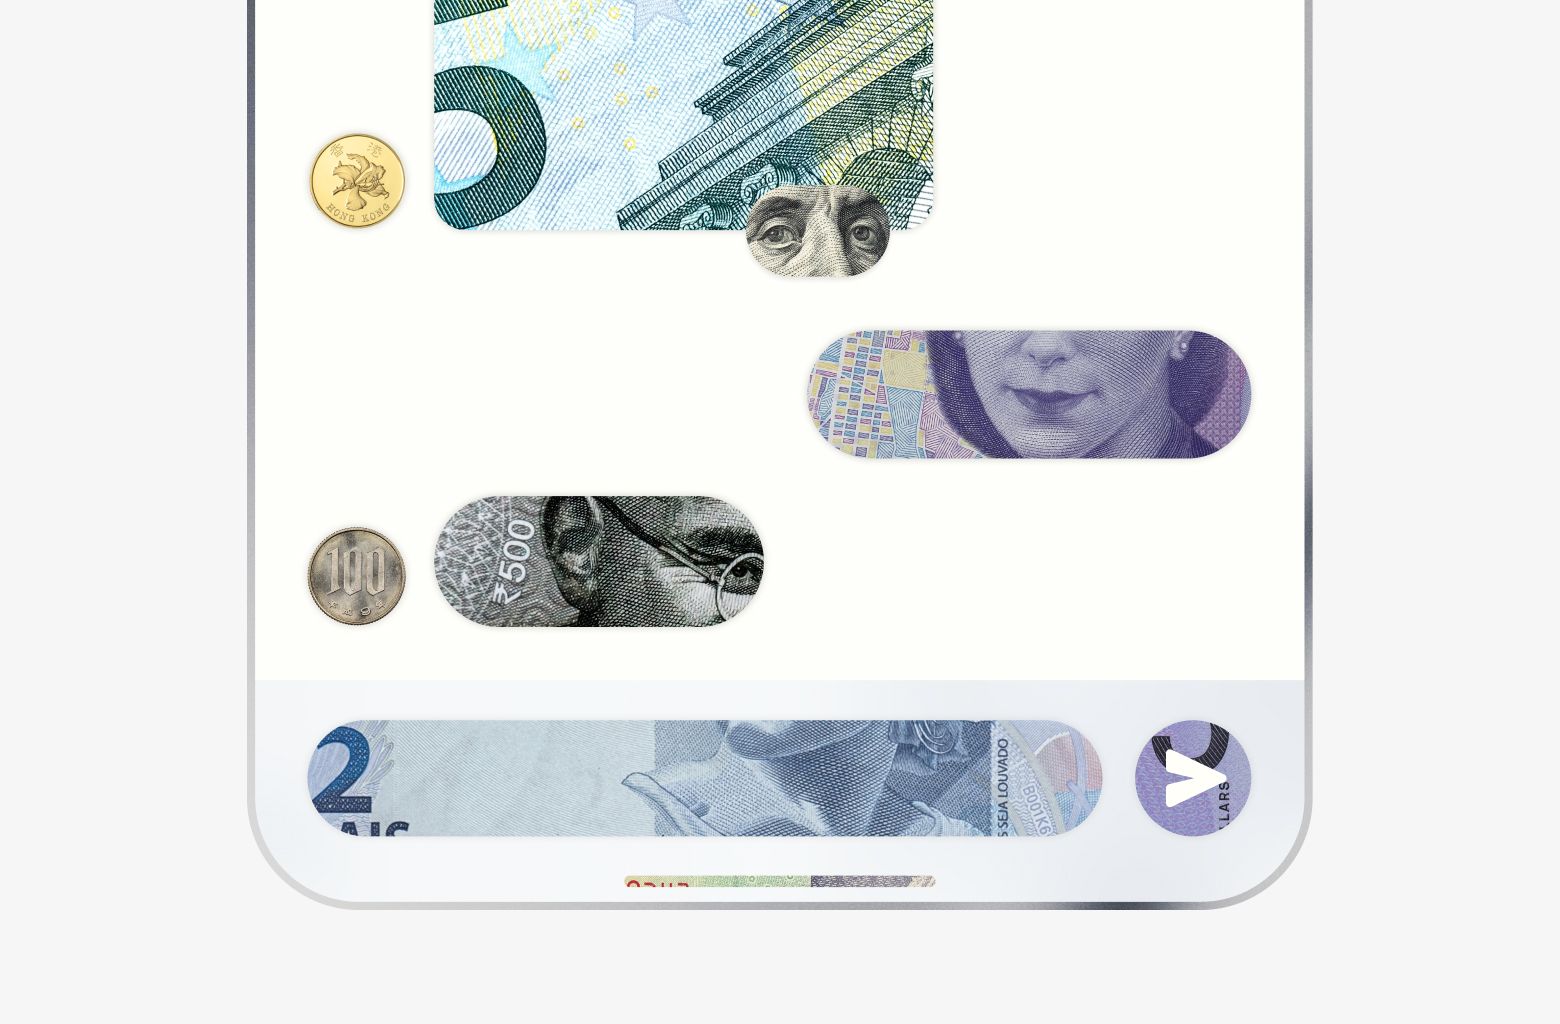 An illustration of a phone screen displaying the 99chat interface. Every interface element is represented by photos of currencies from around the world.